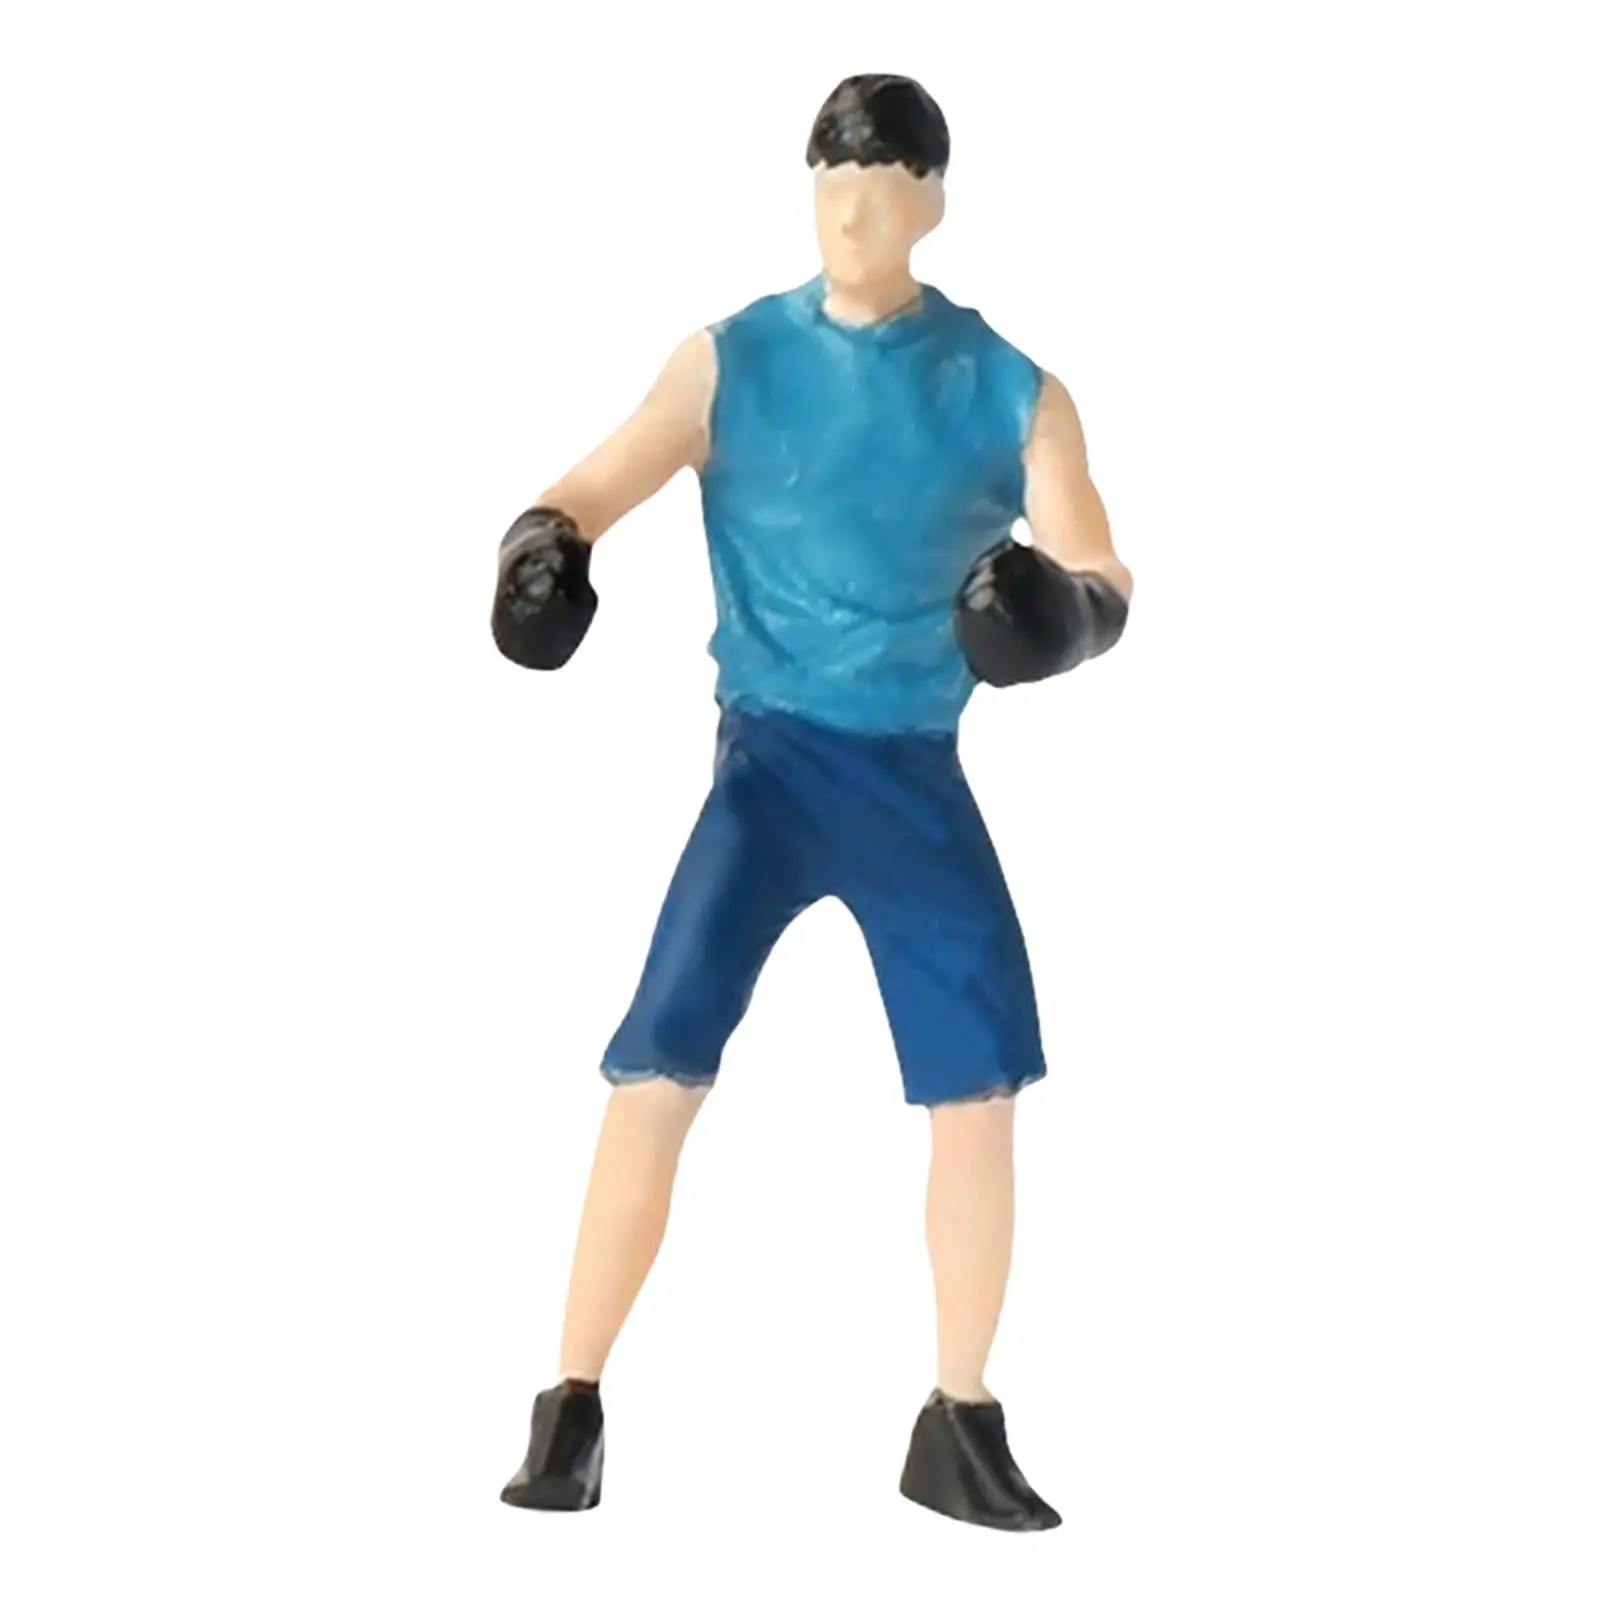 Hand Painted 1:64 Figures Boxing Figurines Tiny People for Miniature Scene